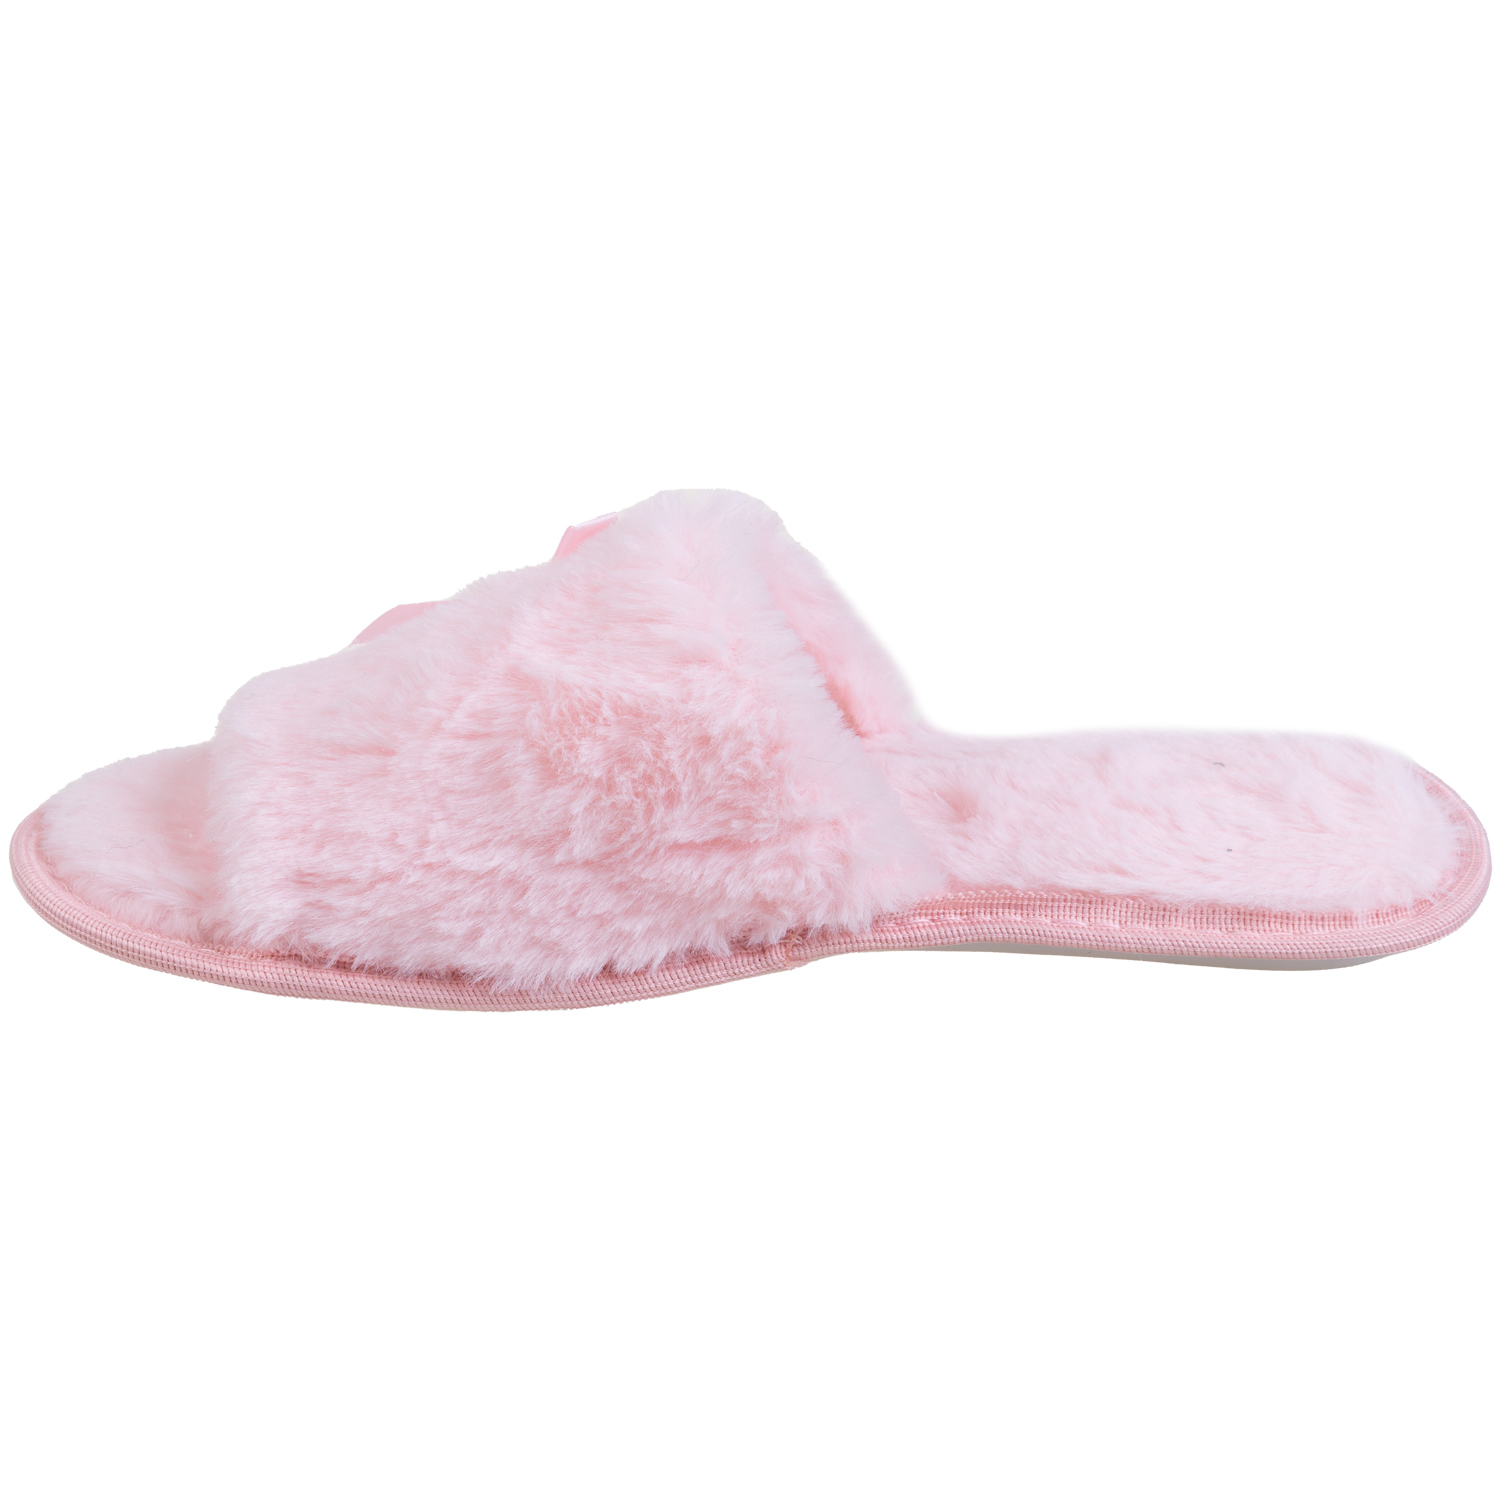 Faux fur open toe slippers with satin bow & jewel - Pink. Colour: pink.  Size: s